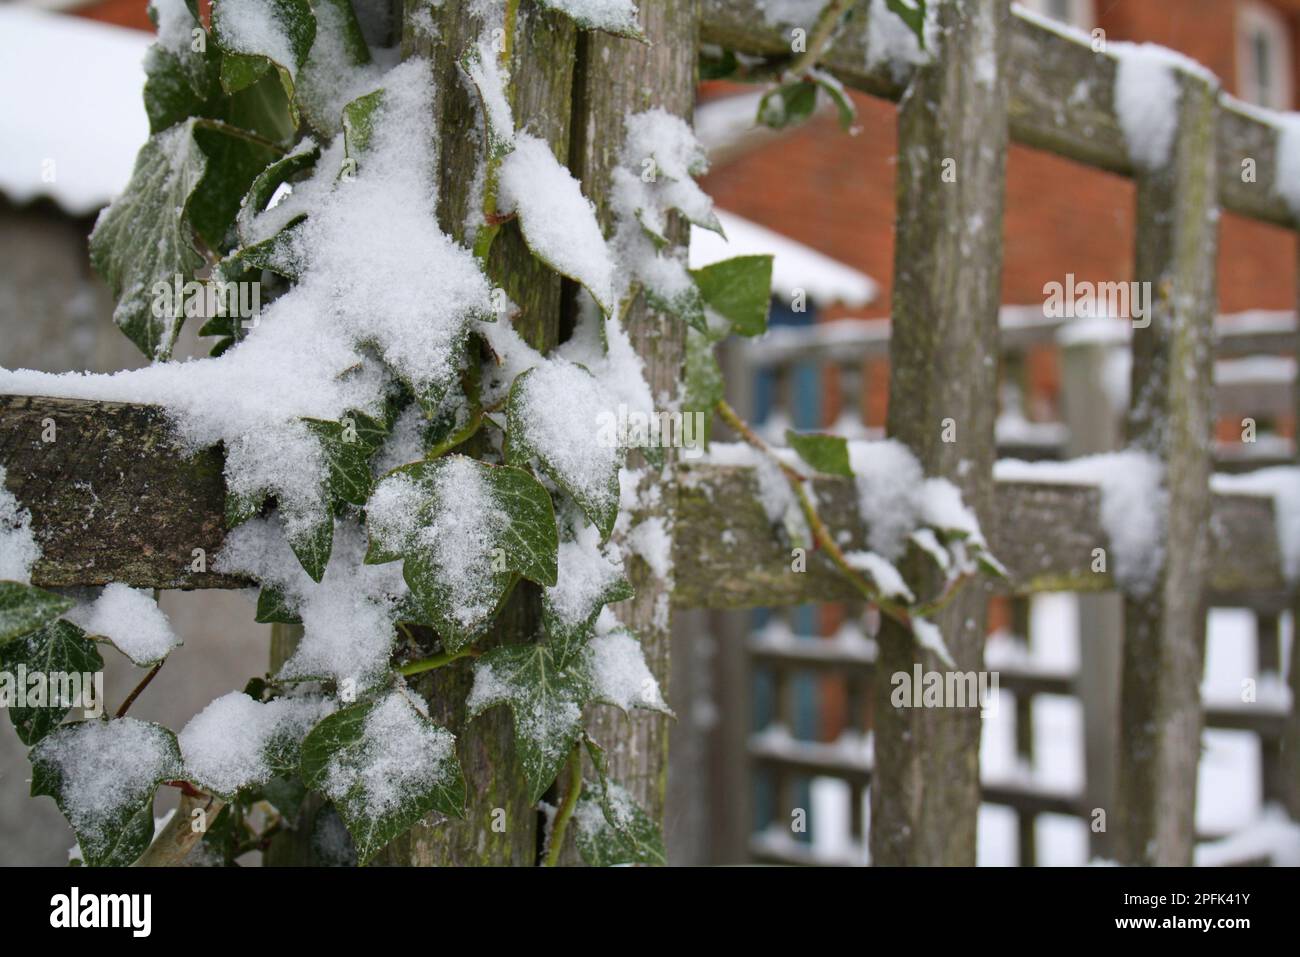 Common ivy (Hedera helix) snowy leaves growing on a garden trellis, Suffolk, England, United Kingdom Stock Photo